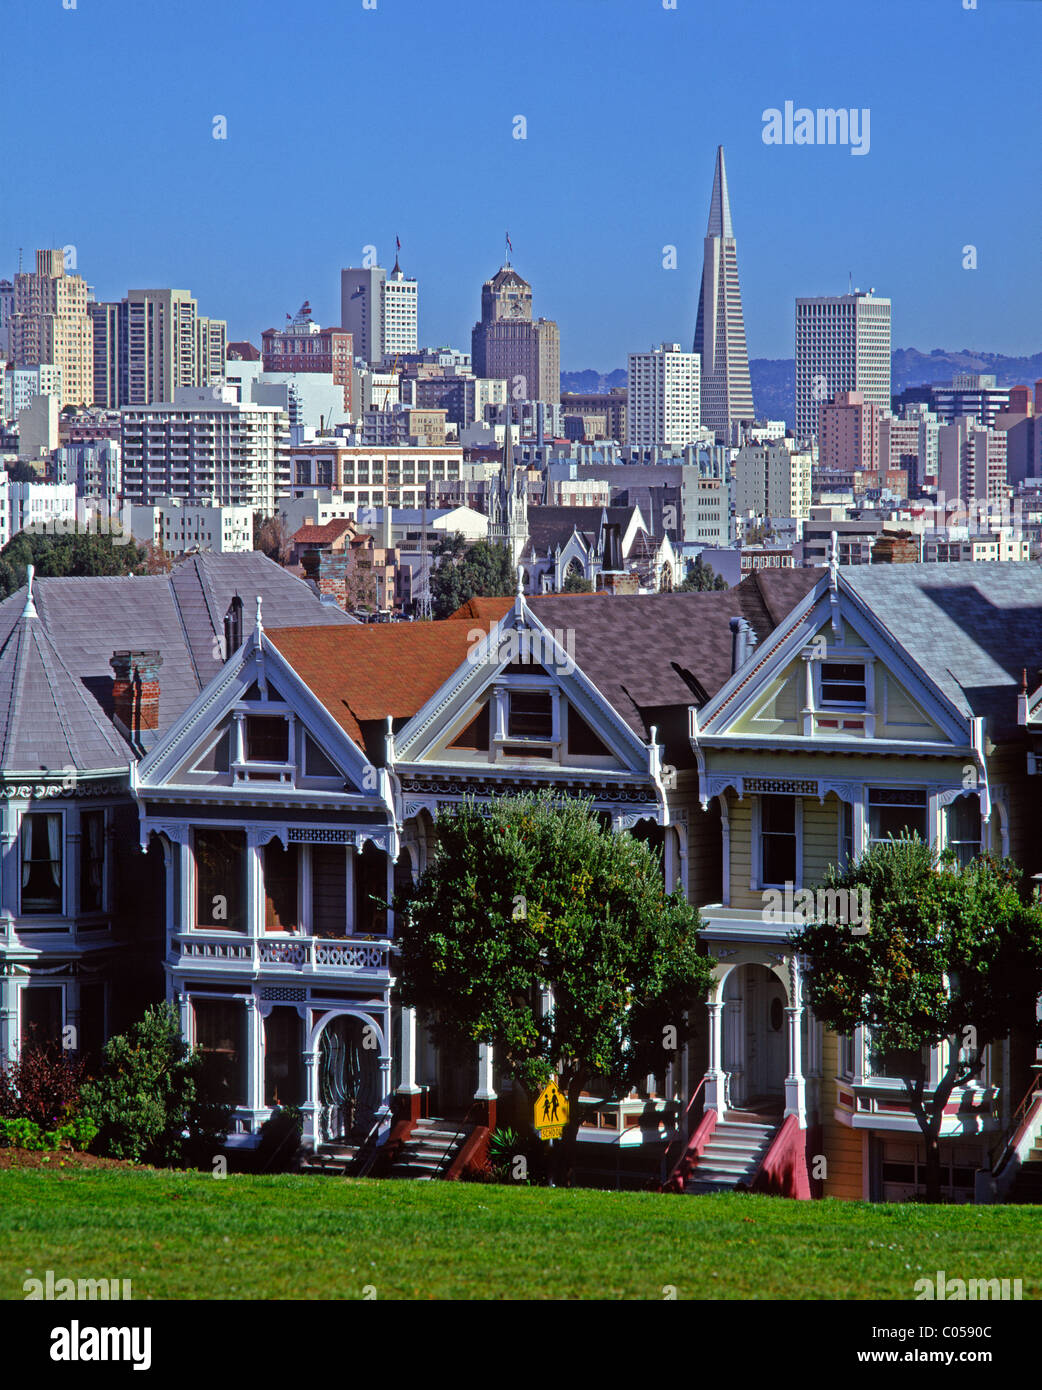 USA, California, San Francisco, Steiner St, the painted ladies and views to modern city Stock Photo